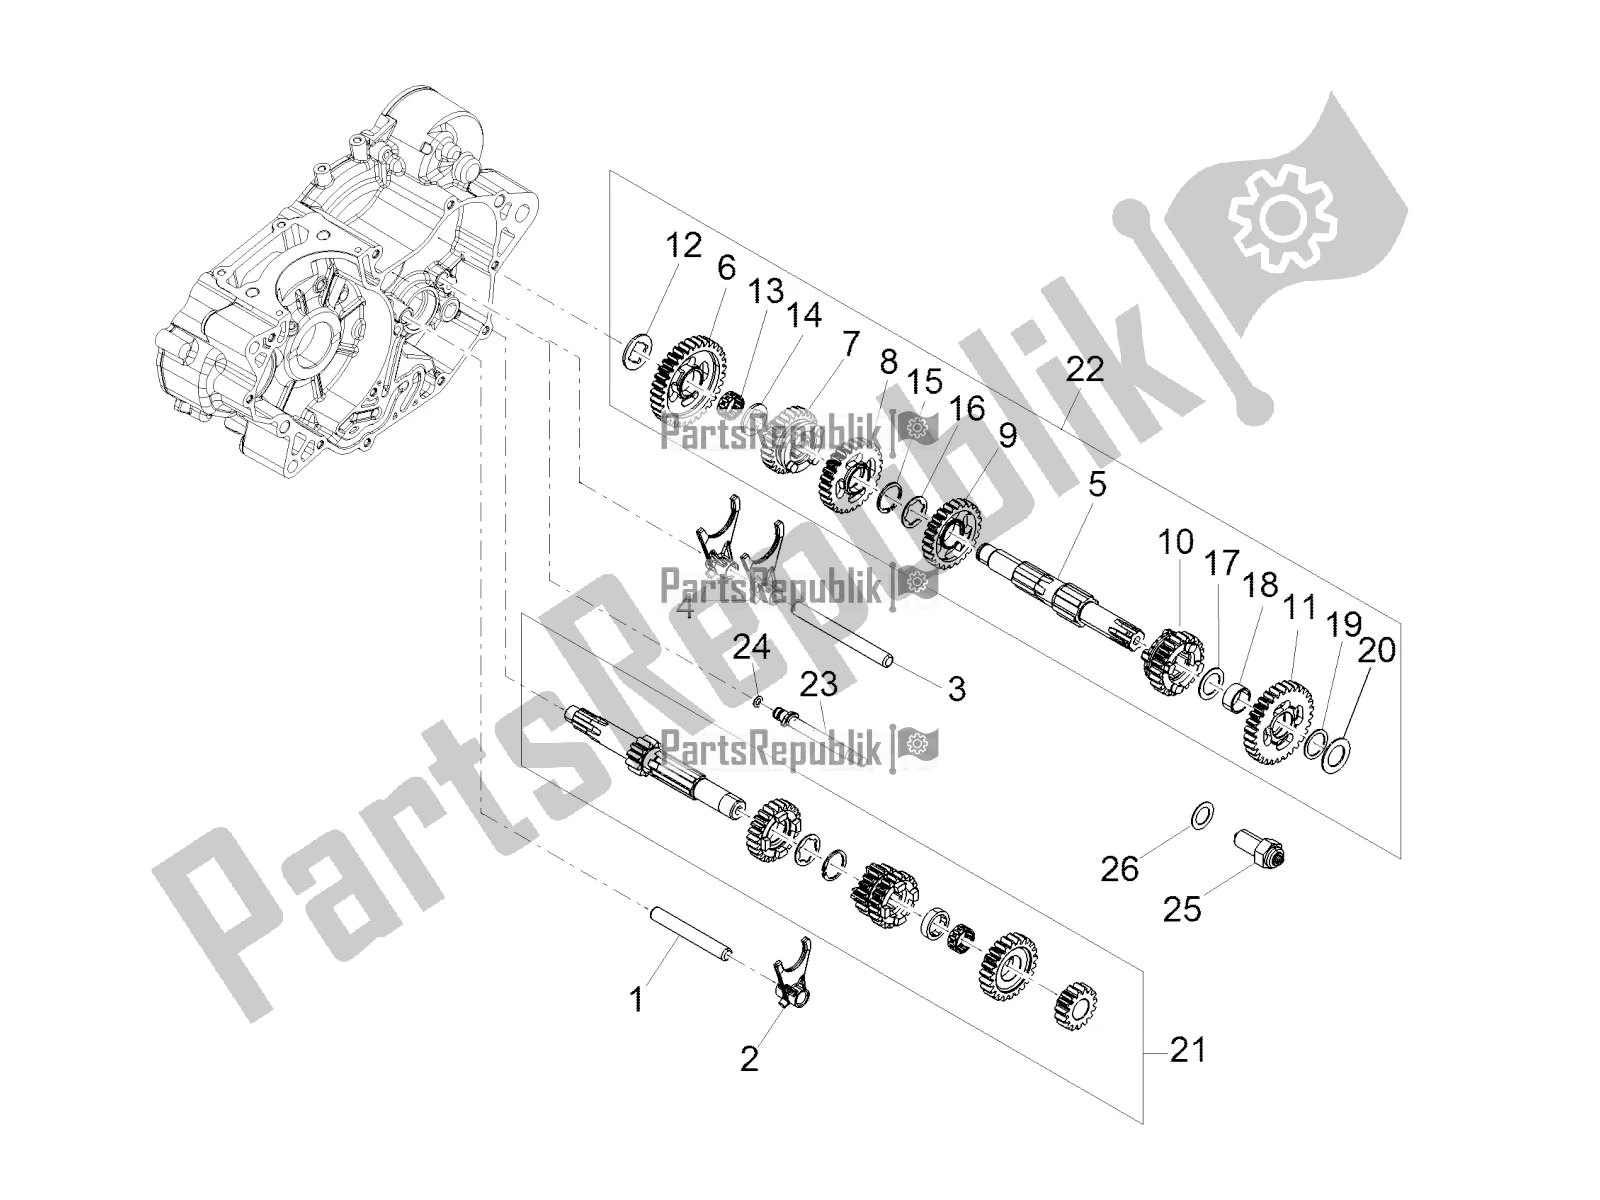 All parts for the Gear Box - Gear Assembly of the Aprilia RS 125 4T ABS Replica Apac 2021